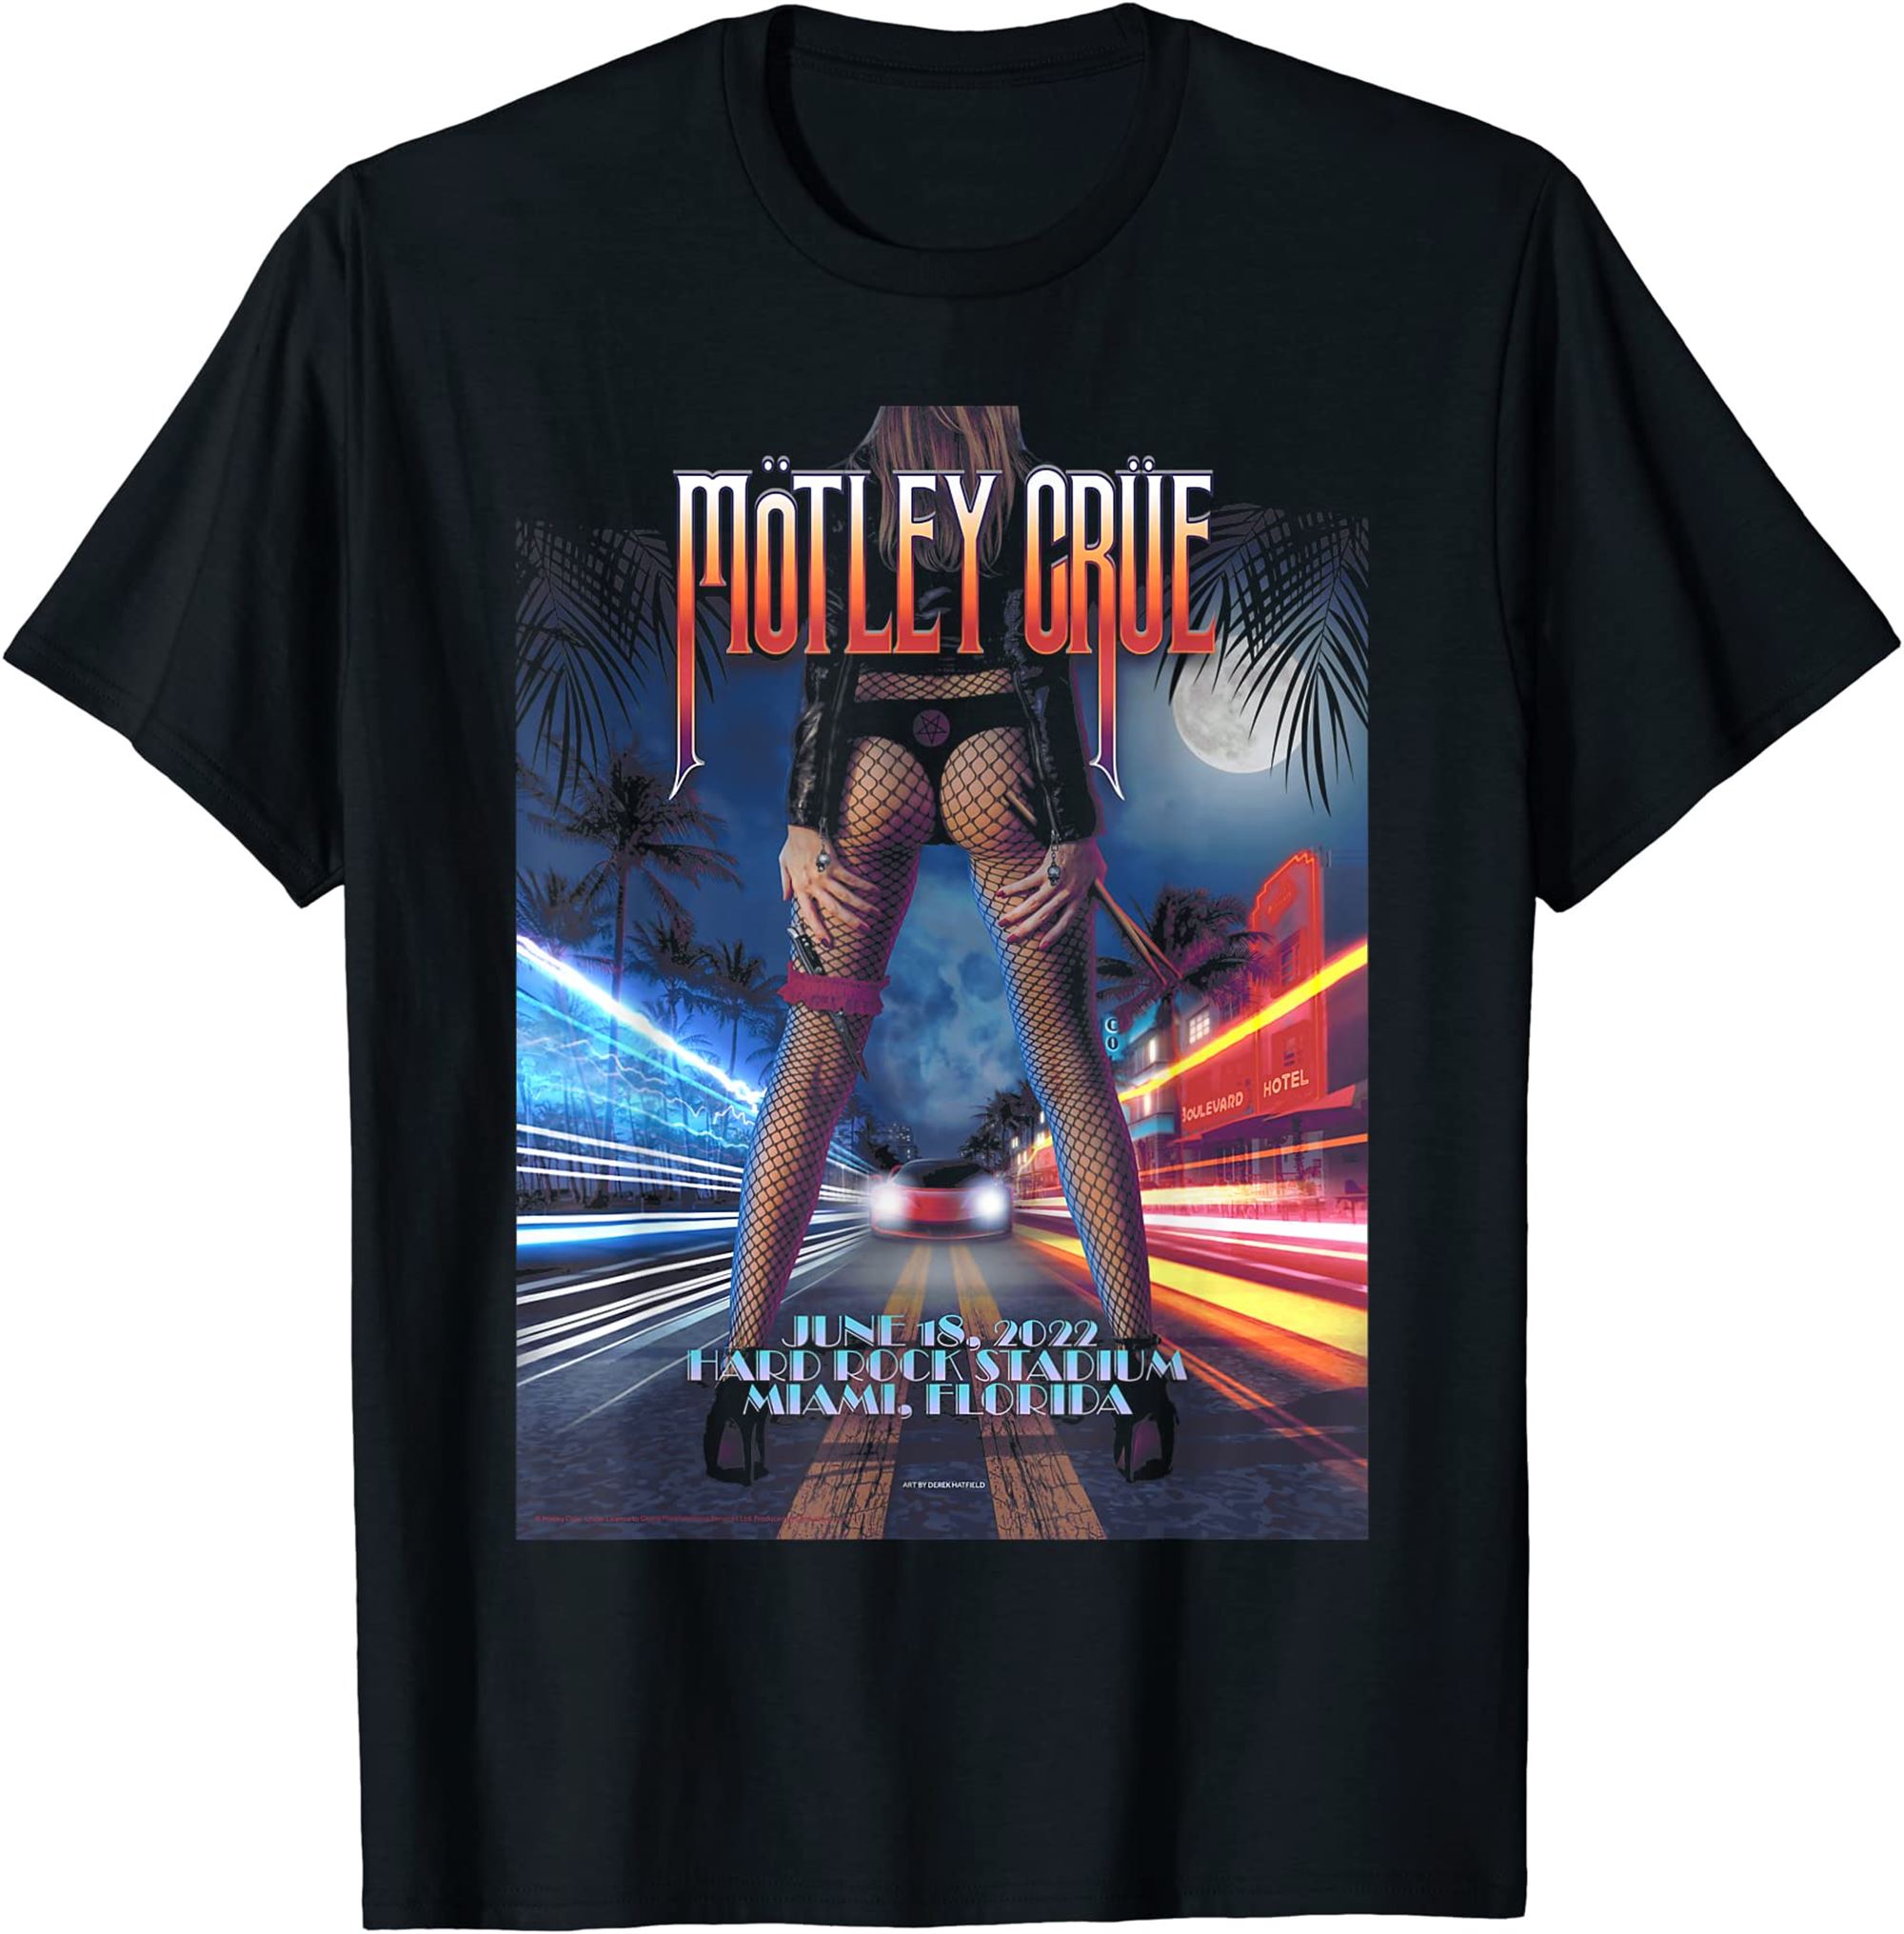 Mötley Crüe The Stadium Tour Miami Event T-shirt Full Size Up To 5xl